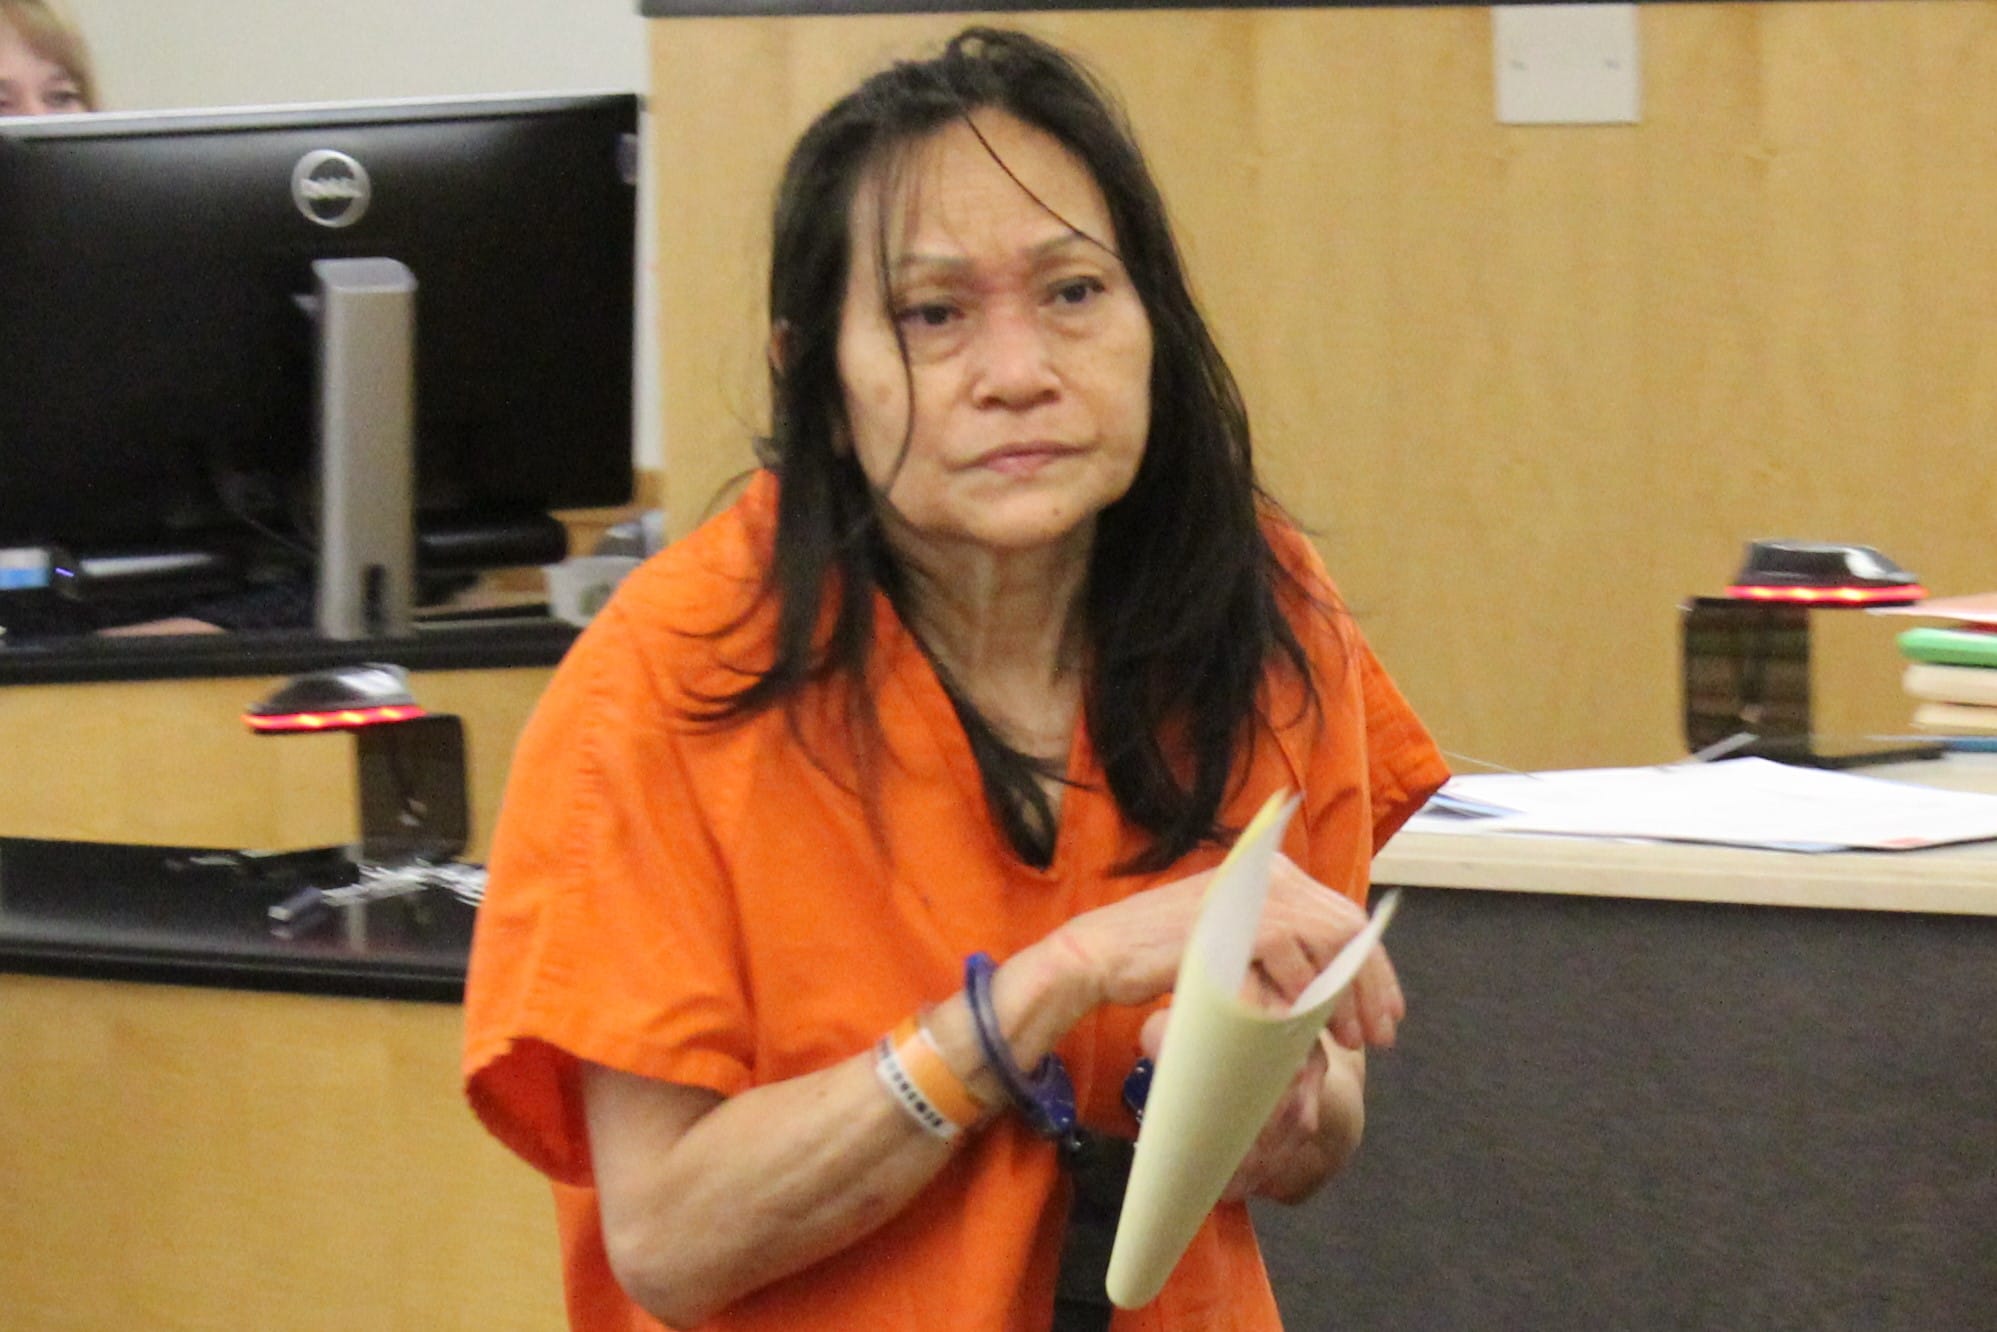 Momlamai Dara, 59, appears in Clark County Superior Court on Friday to face a charge of second-degree attempted murder for allegedly stabbing her husband, who wanted a divorce.